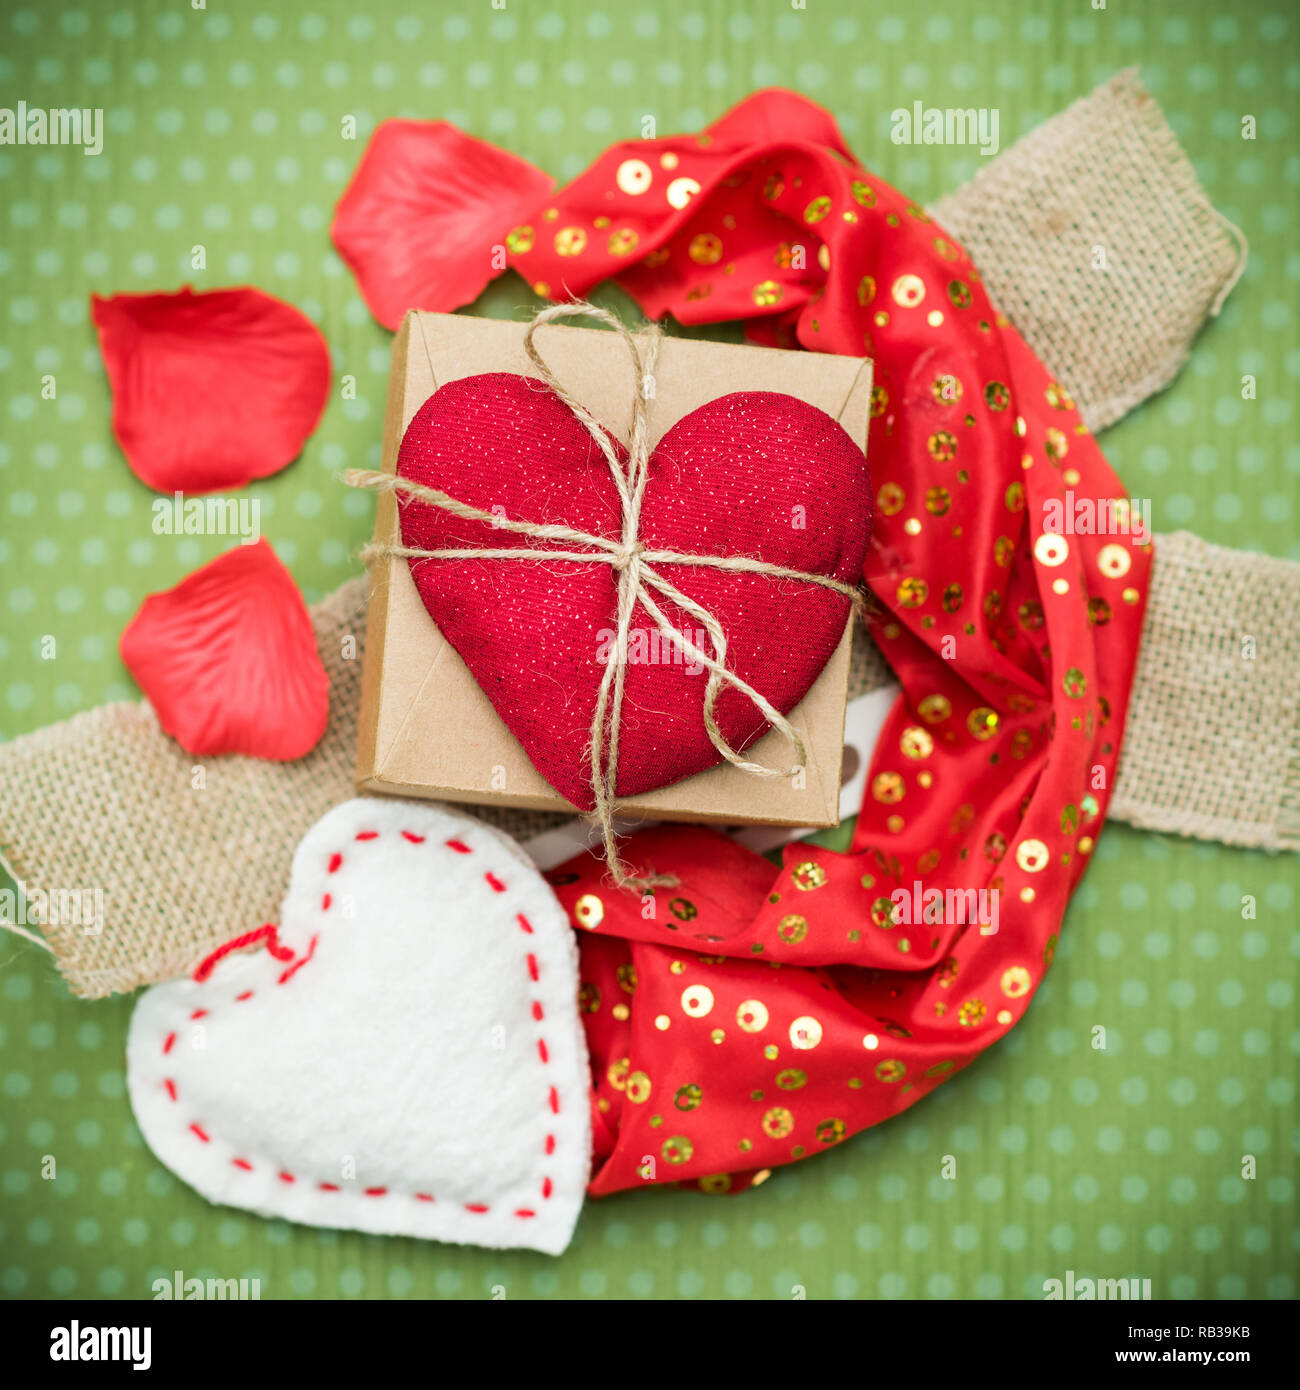 Red heart on green polka dot background Stock Photo